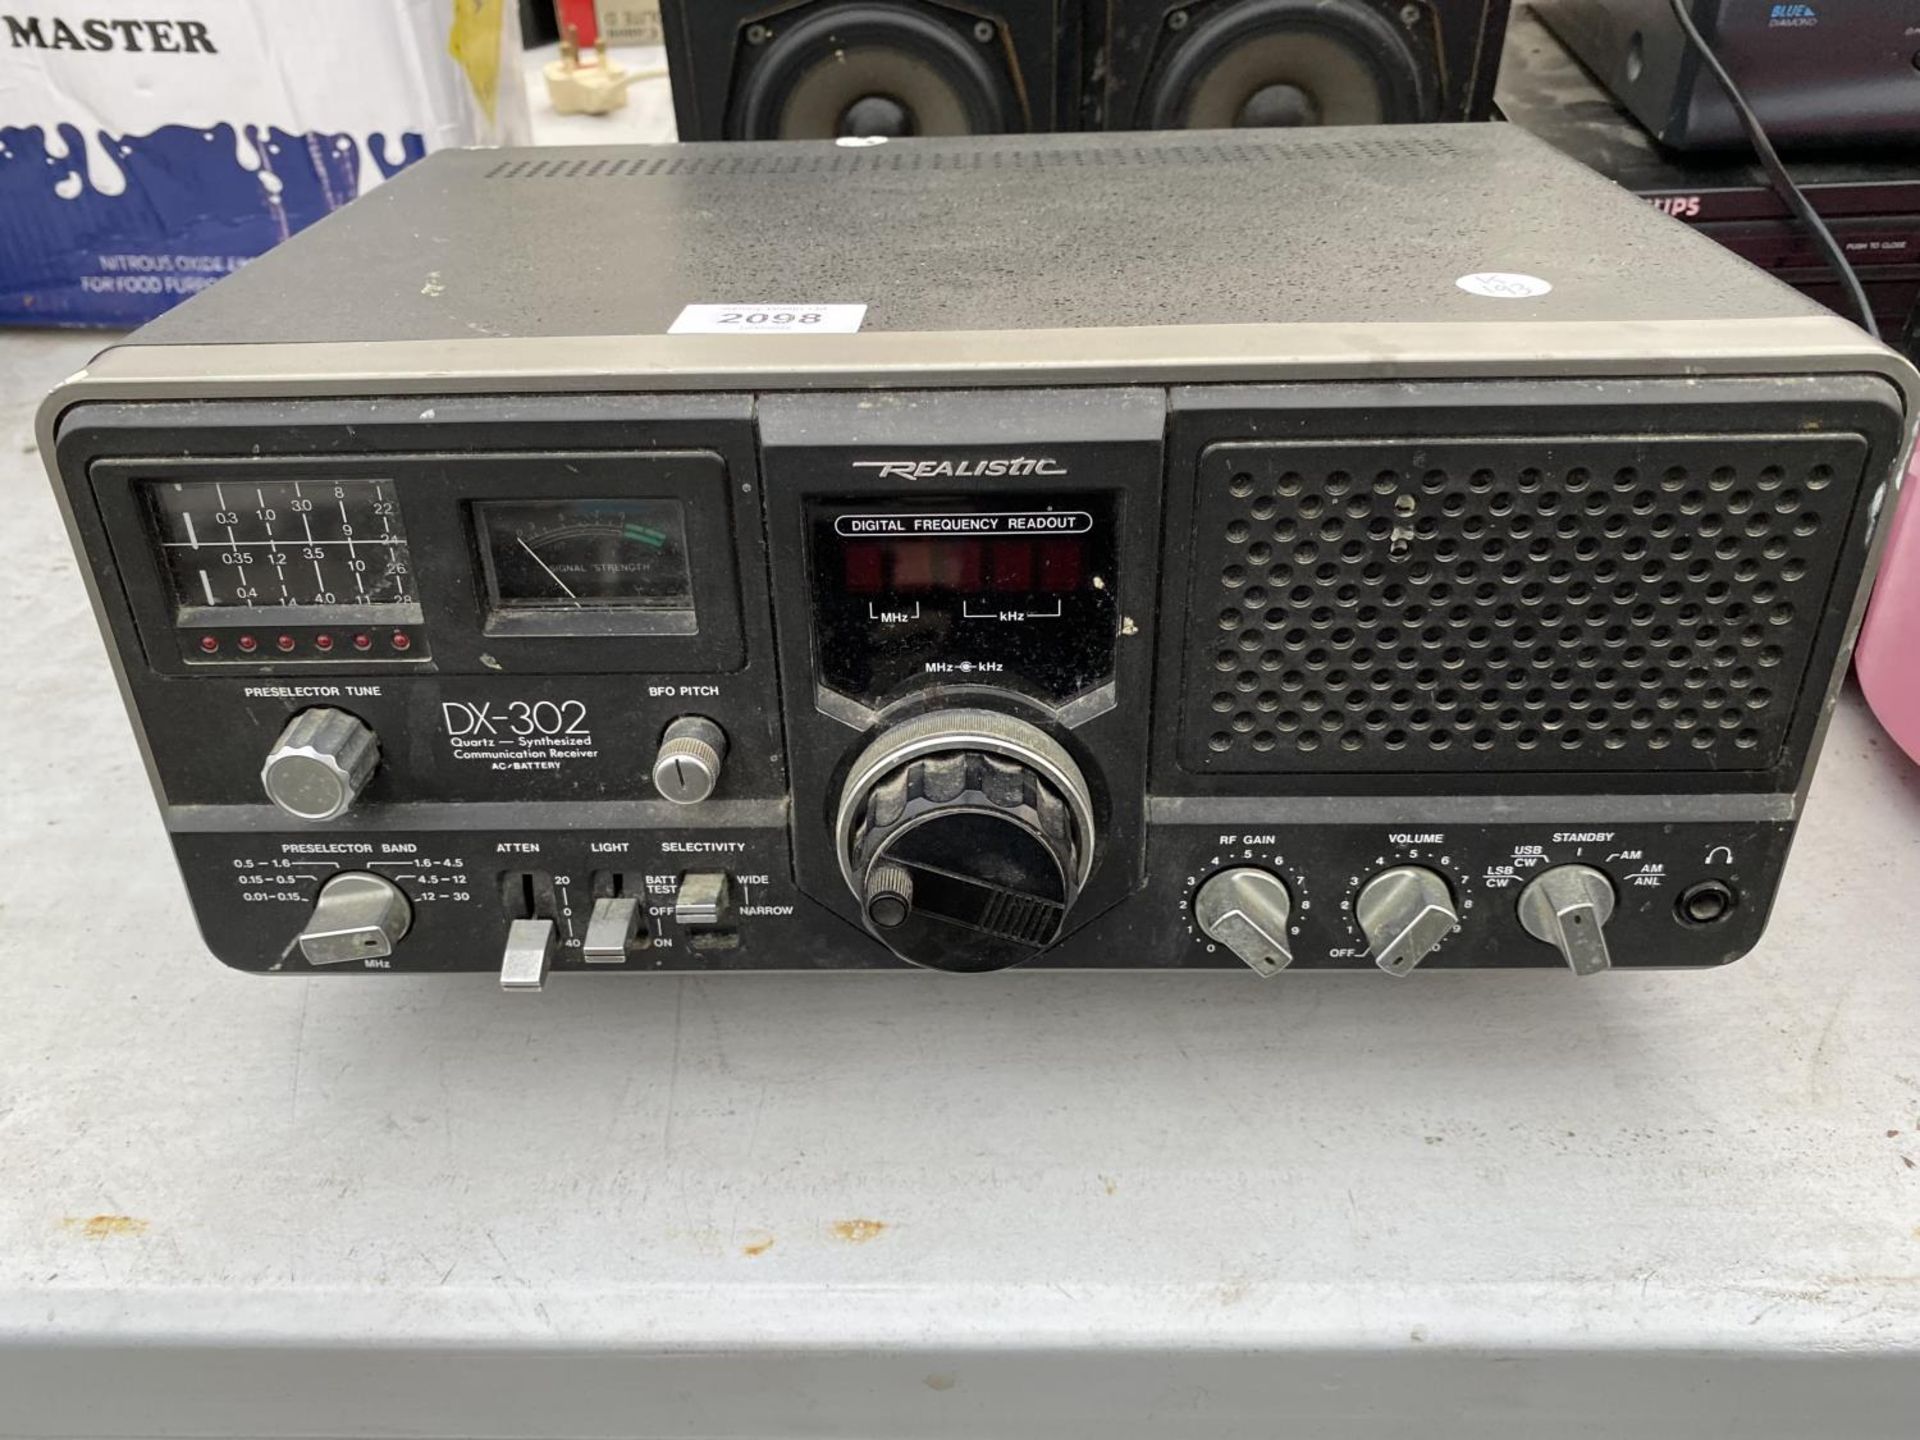 A REALISTIC DX-302 COMMUNICATION RECIEVER - Image 2 of 3